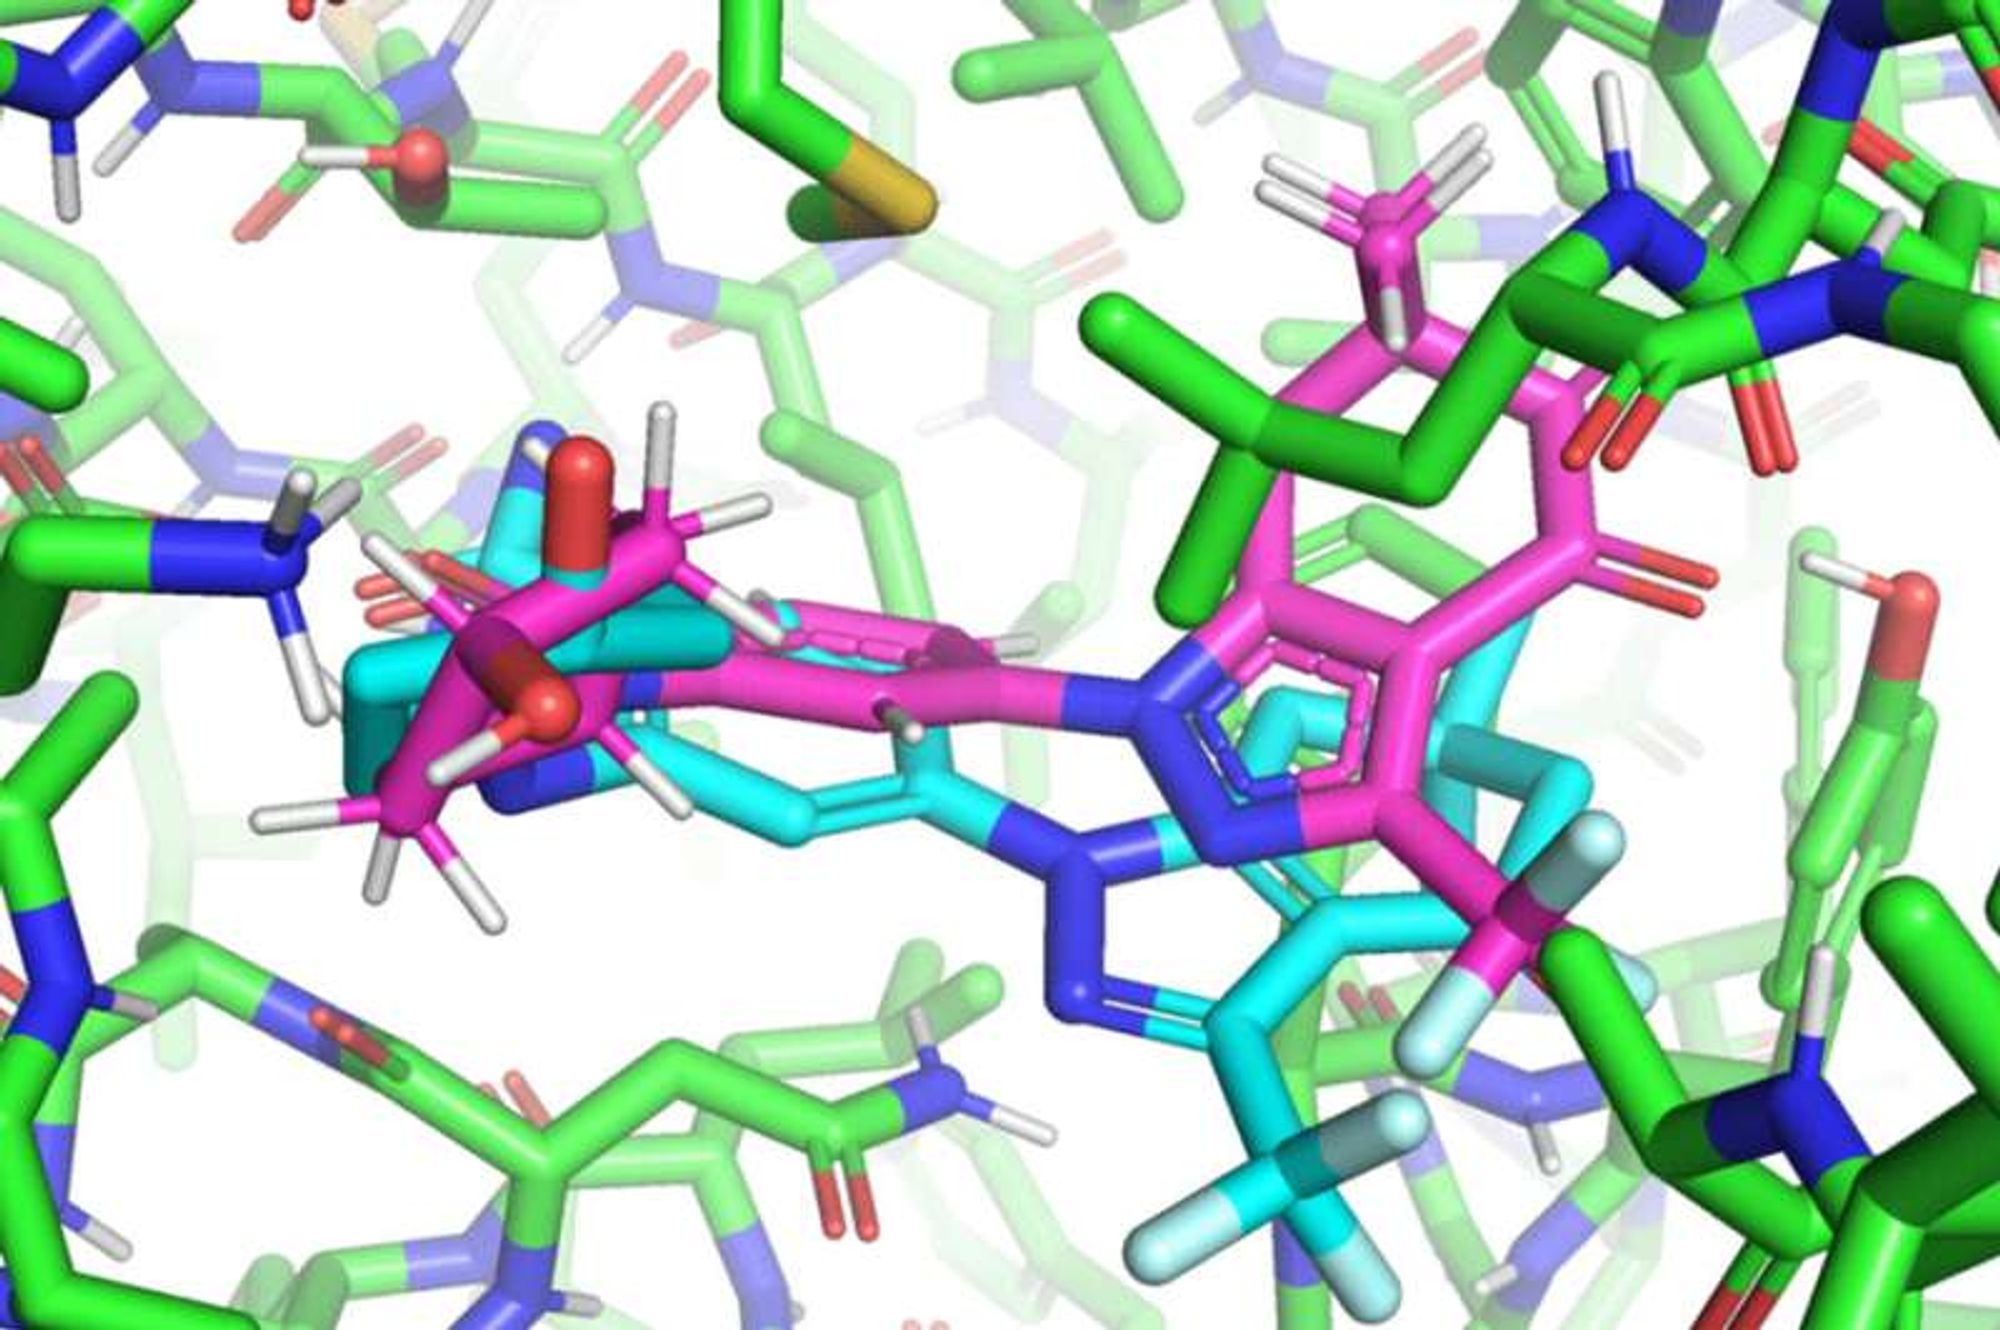 Artificial intelligence model finds potential drug molecules a thousand times faster